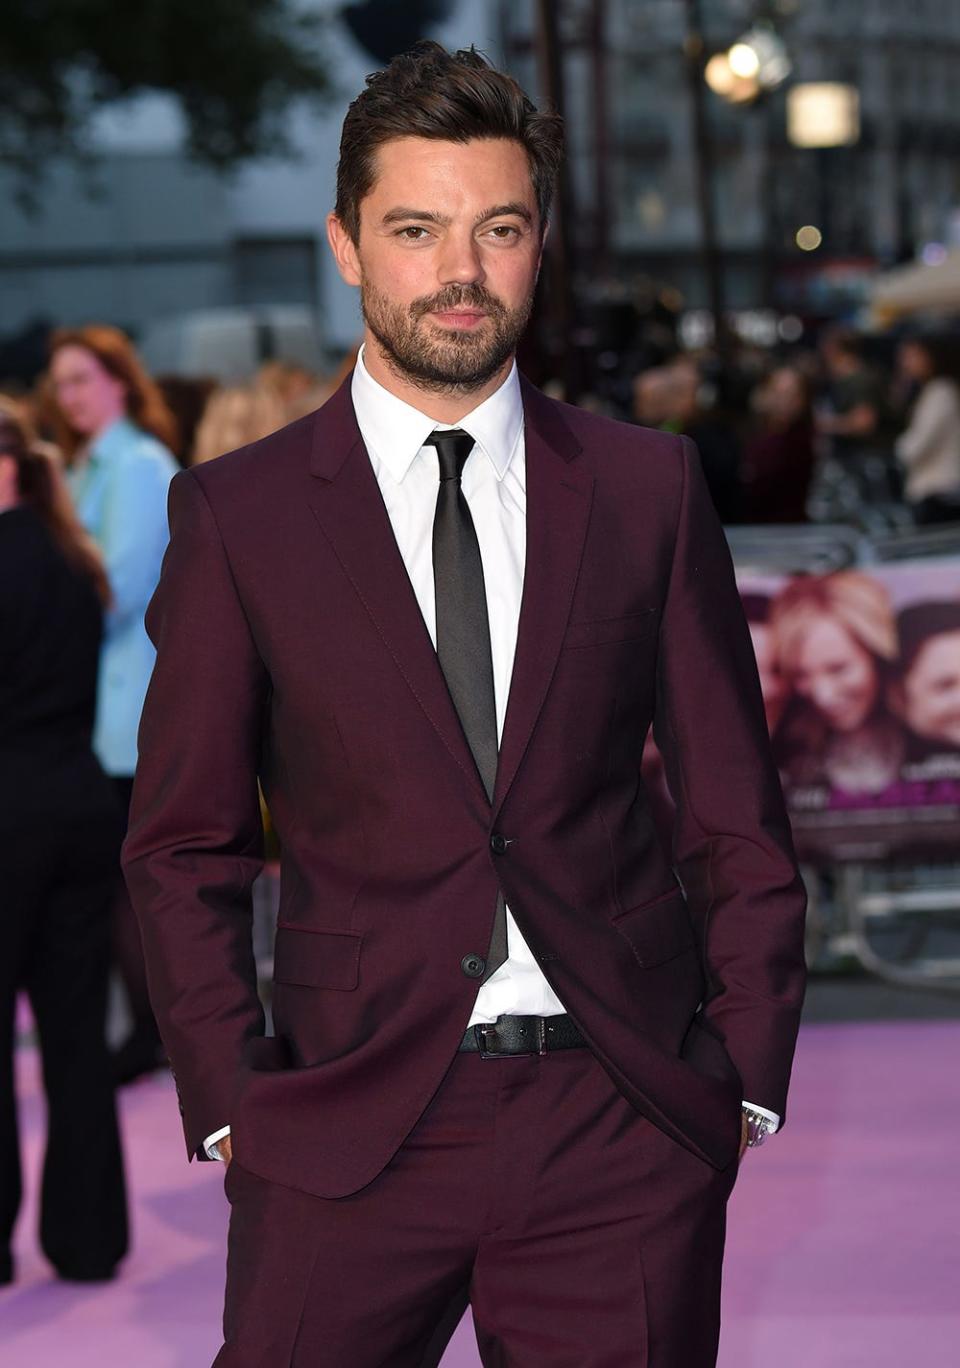 <p><strong>Release date: TBC on BBC One </strong></p><p>An impressive cast has been lined-up for new BBC drama The Gold, with Hollywood stars Dominic Cooper and Downton's Hugh Bonneville both on the call sheet. <br></p><p>Inspired by the true story of the iconic 1980s Brink’s-Mat robbery, The Gold will bring to life the ‘crime of the Century’ across six episodes on BBC One. It's being directed by Oscar-winning Aneil Karia of The Long Goodbye. <br></p><p>The BBC says: "On the 26 November 1983, six armed men broke into the Brink’s-Mat security depot near London’s Heathrow Airport, and inadvertently stumbled across gold bullion worth £26m. What started as 'a typical Old Kent Road armed robbery' according to detectives at the time, became a seminal event in British criminal history, remarkable not only for the scale of the theft, at the time the biggest in world history, but for its wider legacy.<br><br>"The disposal of the bullion caused the birth of large-scale international money laundering, provided the dirty money that helped fuel the London Docklands property boom, united blue and white collar criminals and left controversy and murder in its wake."<br></p><p>We can't wait, although filming only recently began in April so we won't expect The Gold to hit our screens until late 2022 or early 2023. </p>